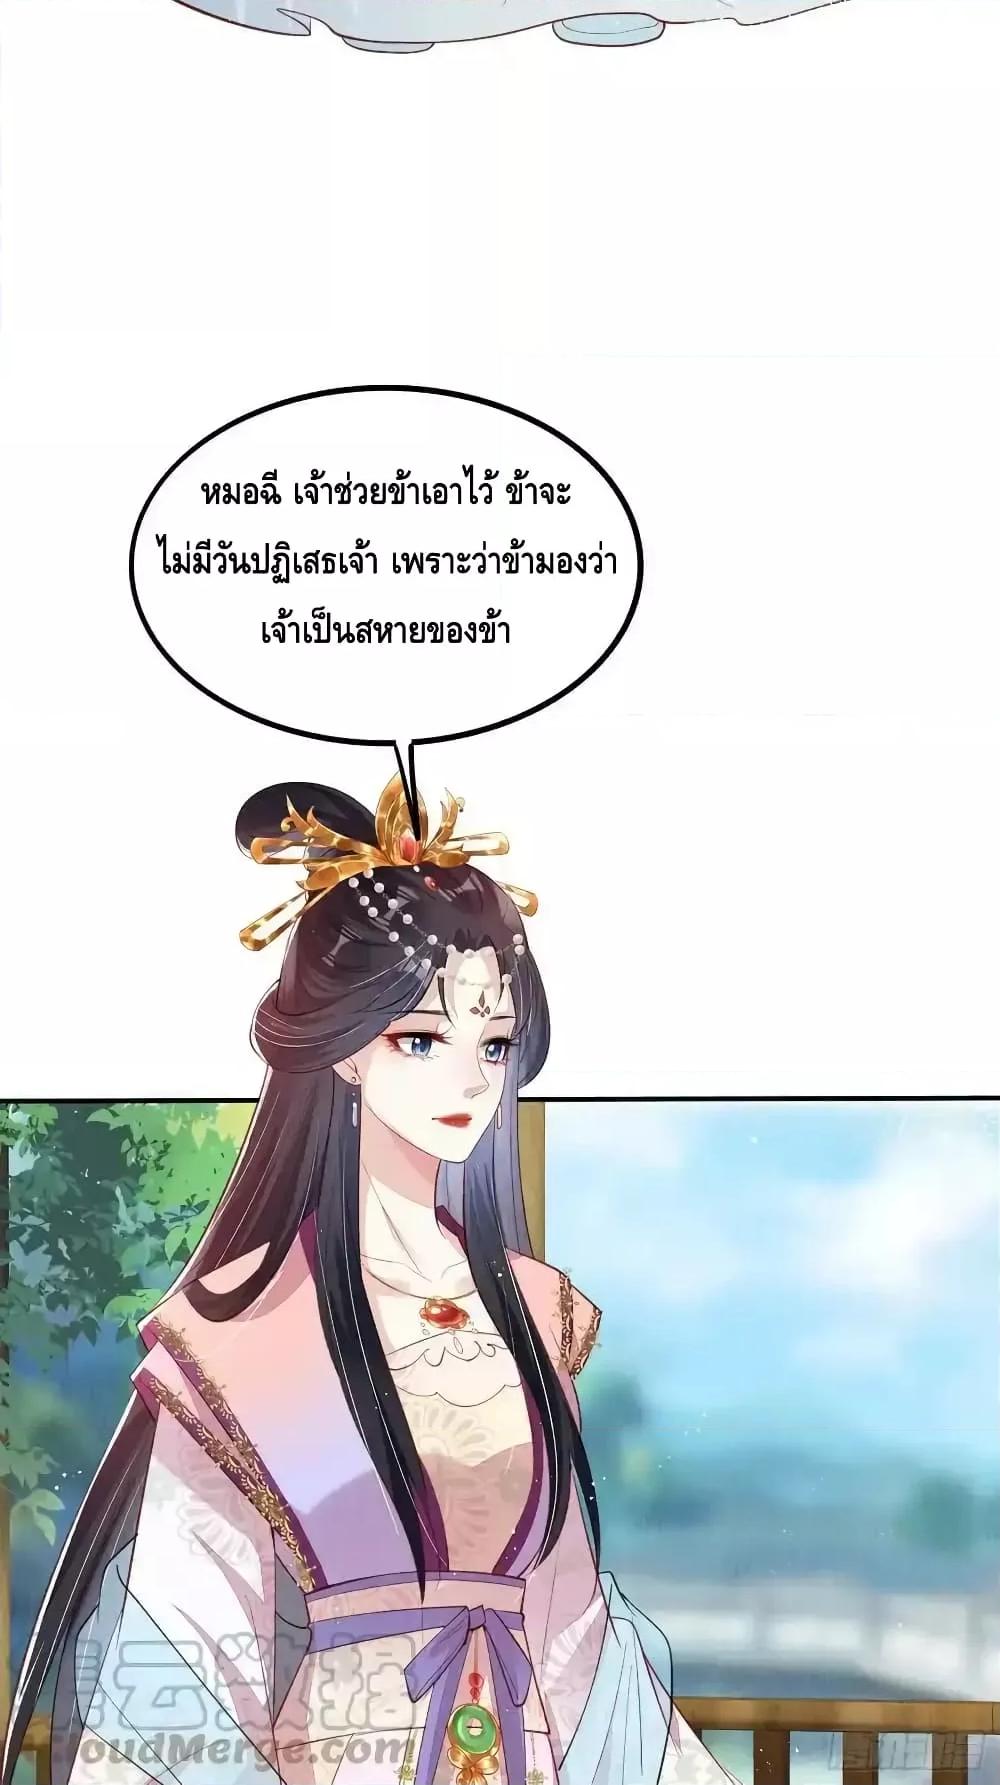 After I Bloom, a Hundred Flowers Will ill – ดอกไม้นับ ตอนที่ 70 (21)